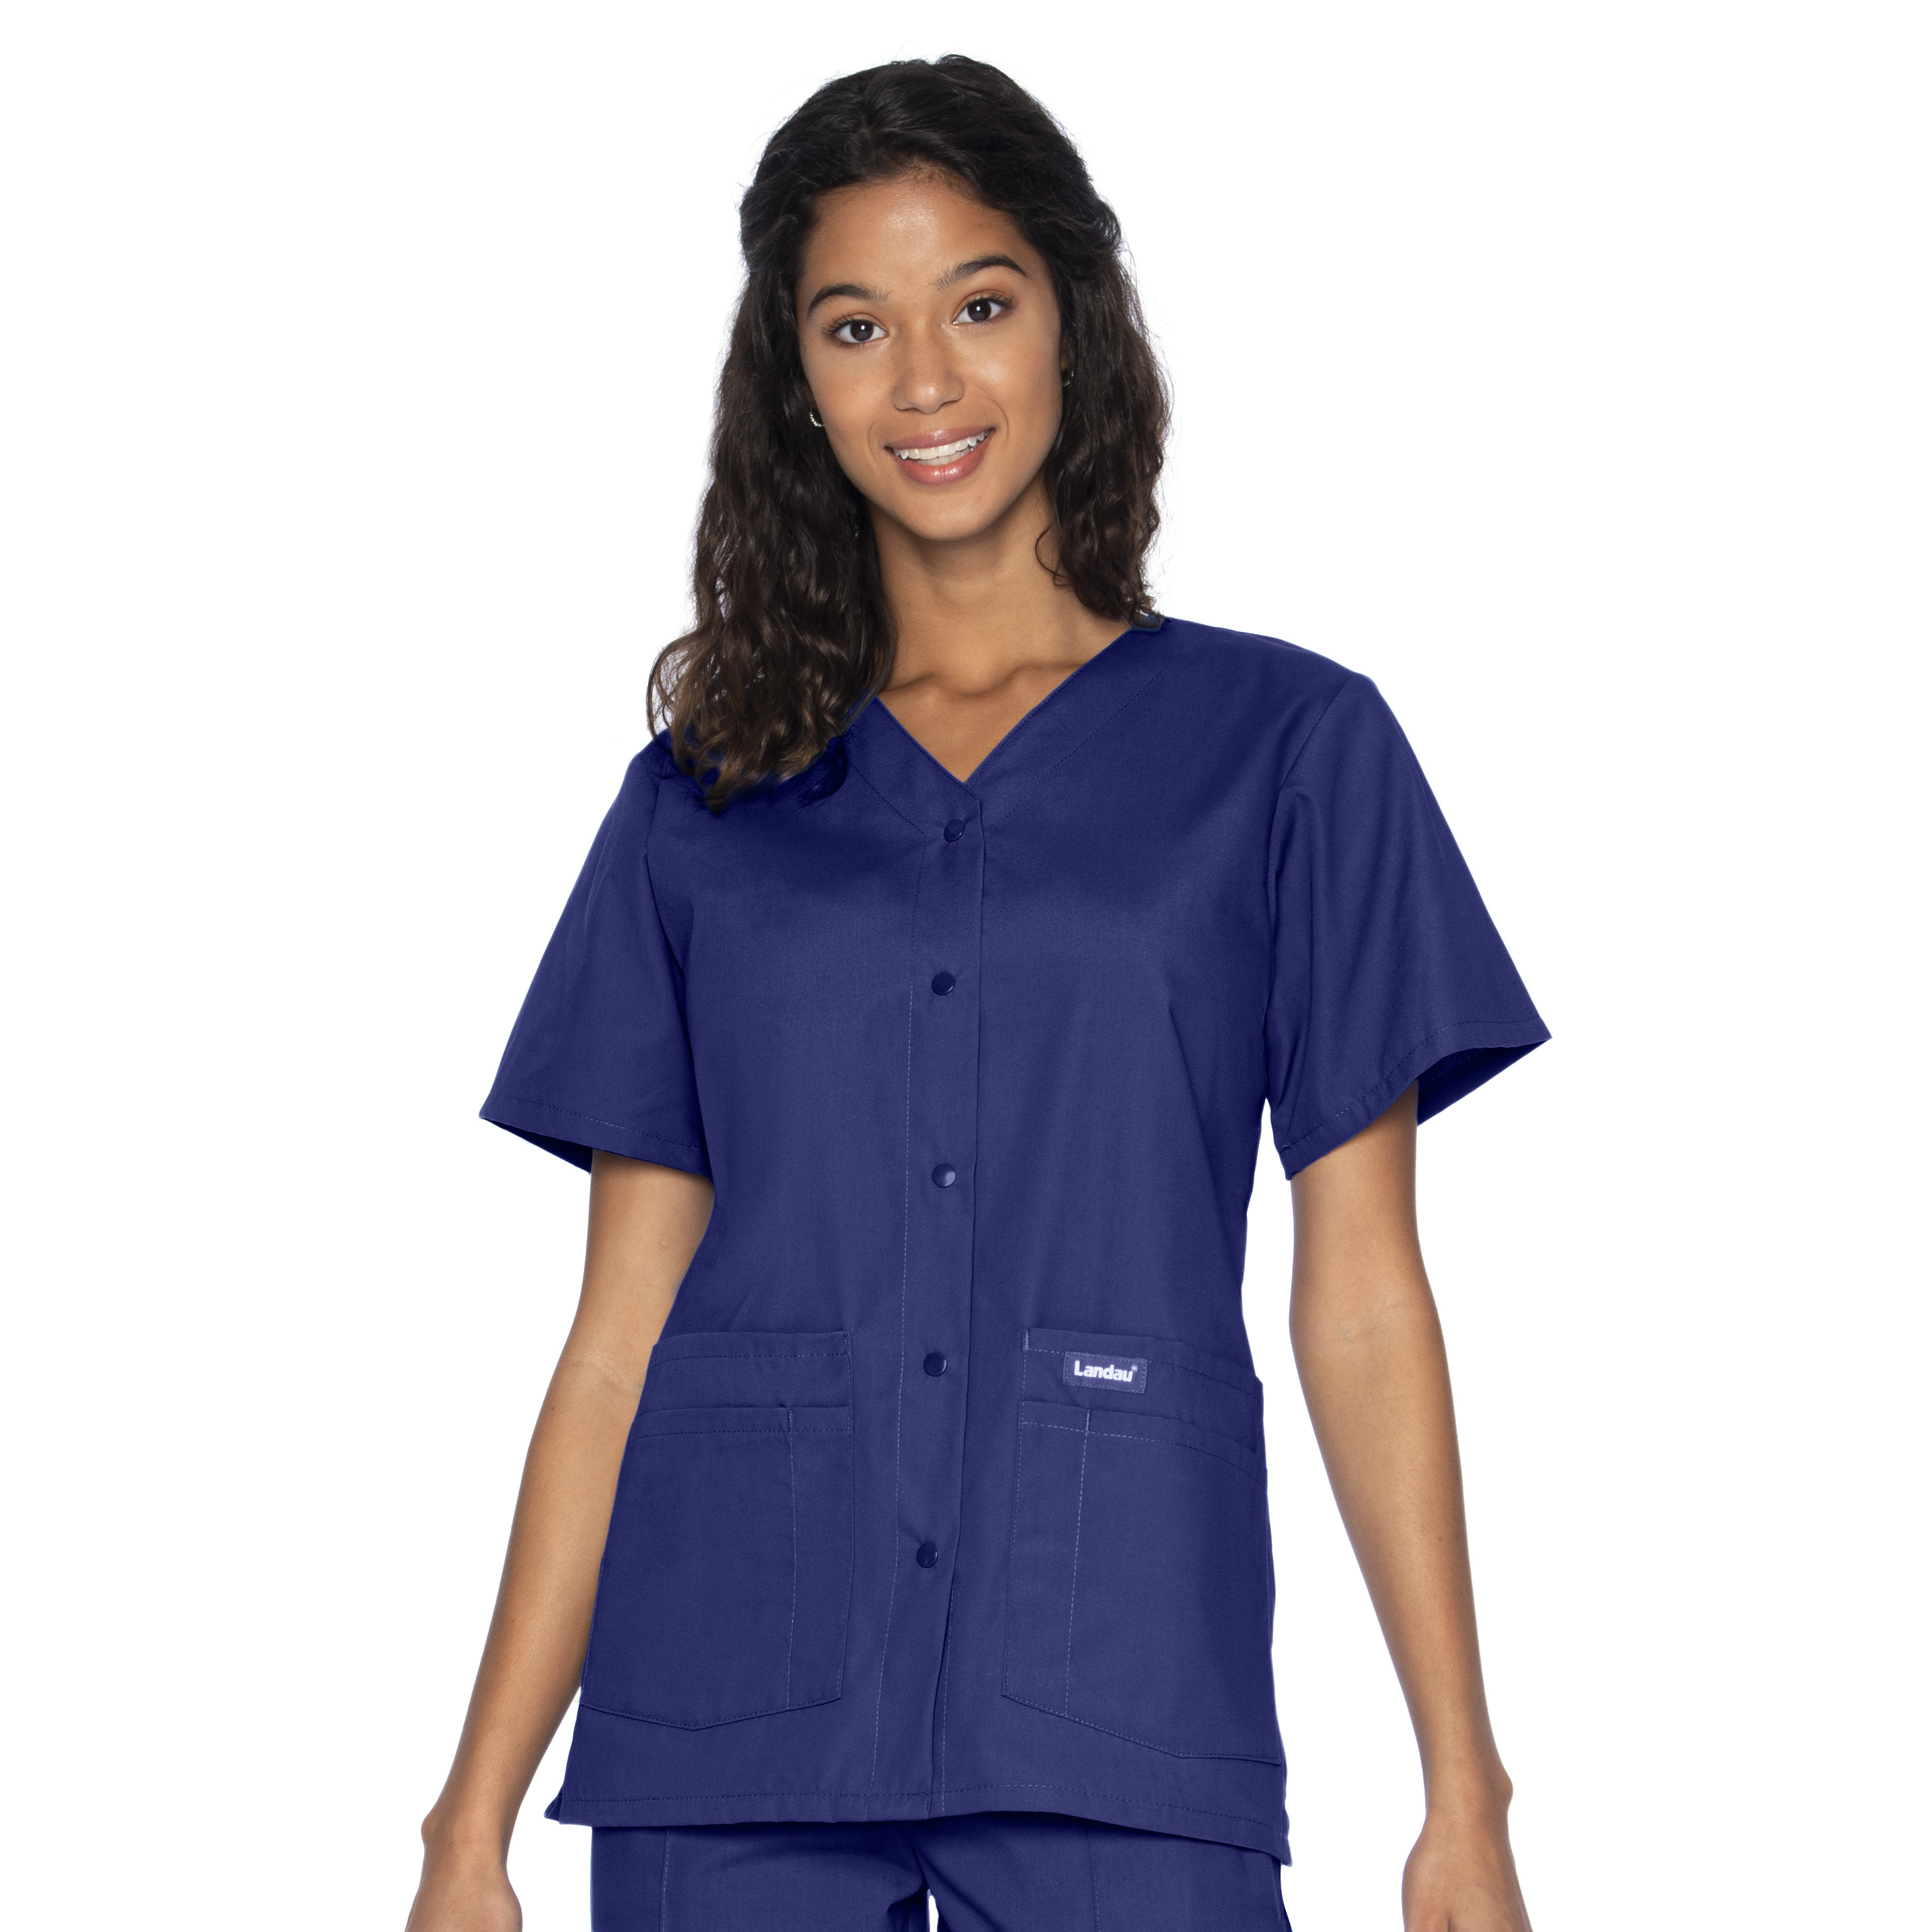 Does the Landau button front scrub top have a fitted feature?